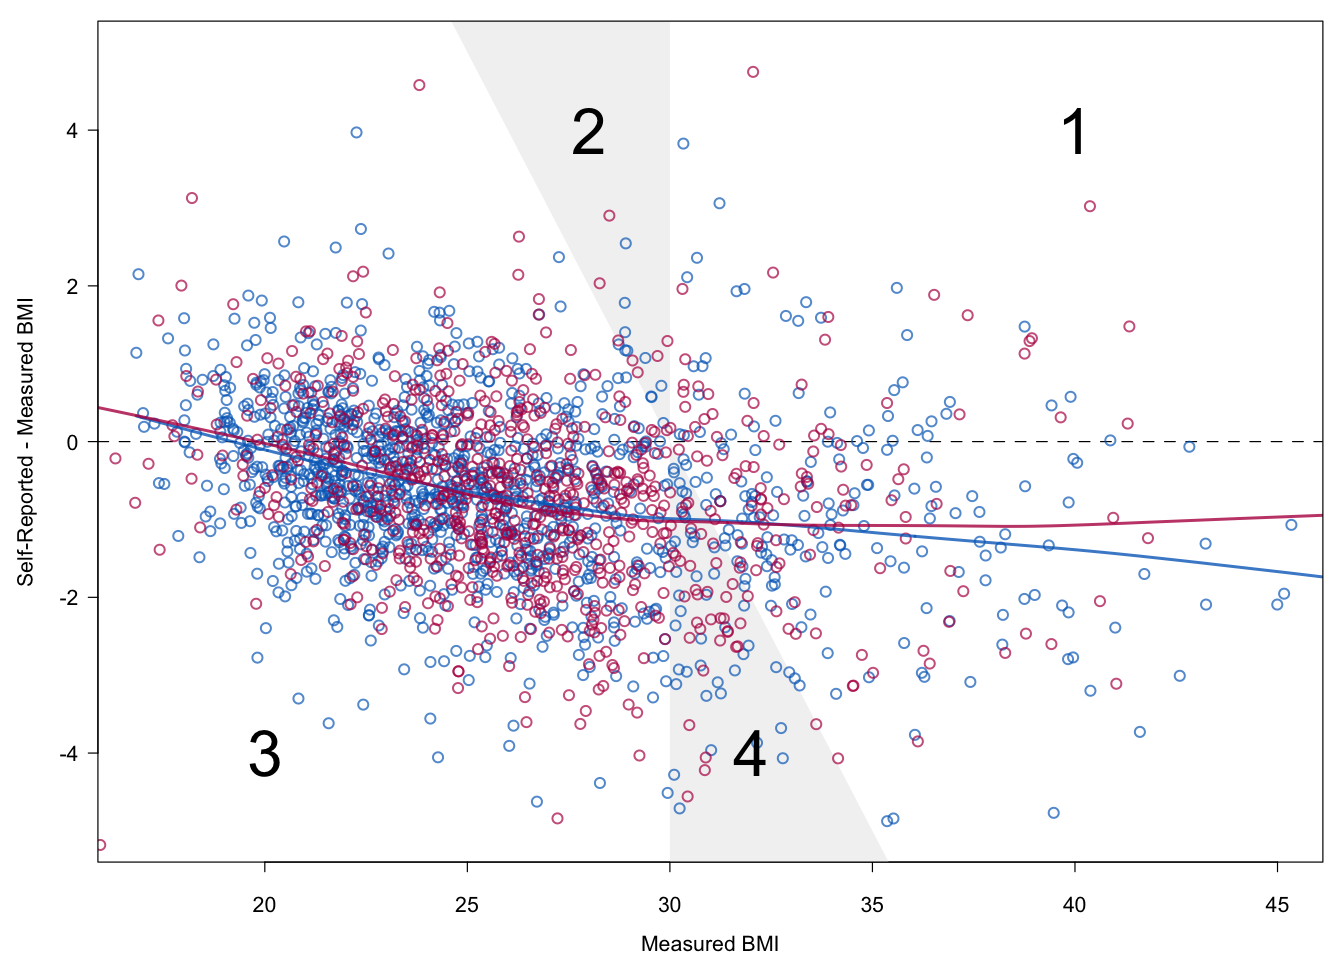 Relation between measured BMI and self-reported BMI in the calibration (blue) and survey (red) data in the first imputed dataset.